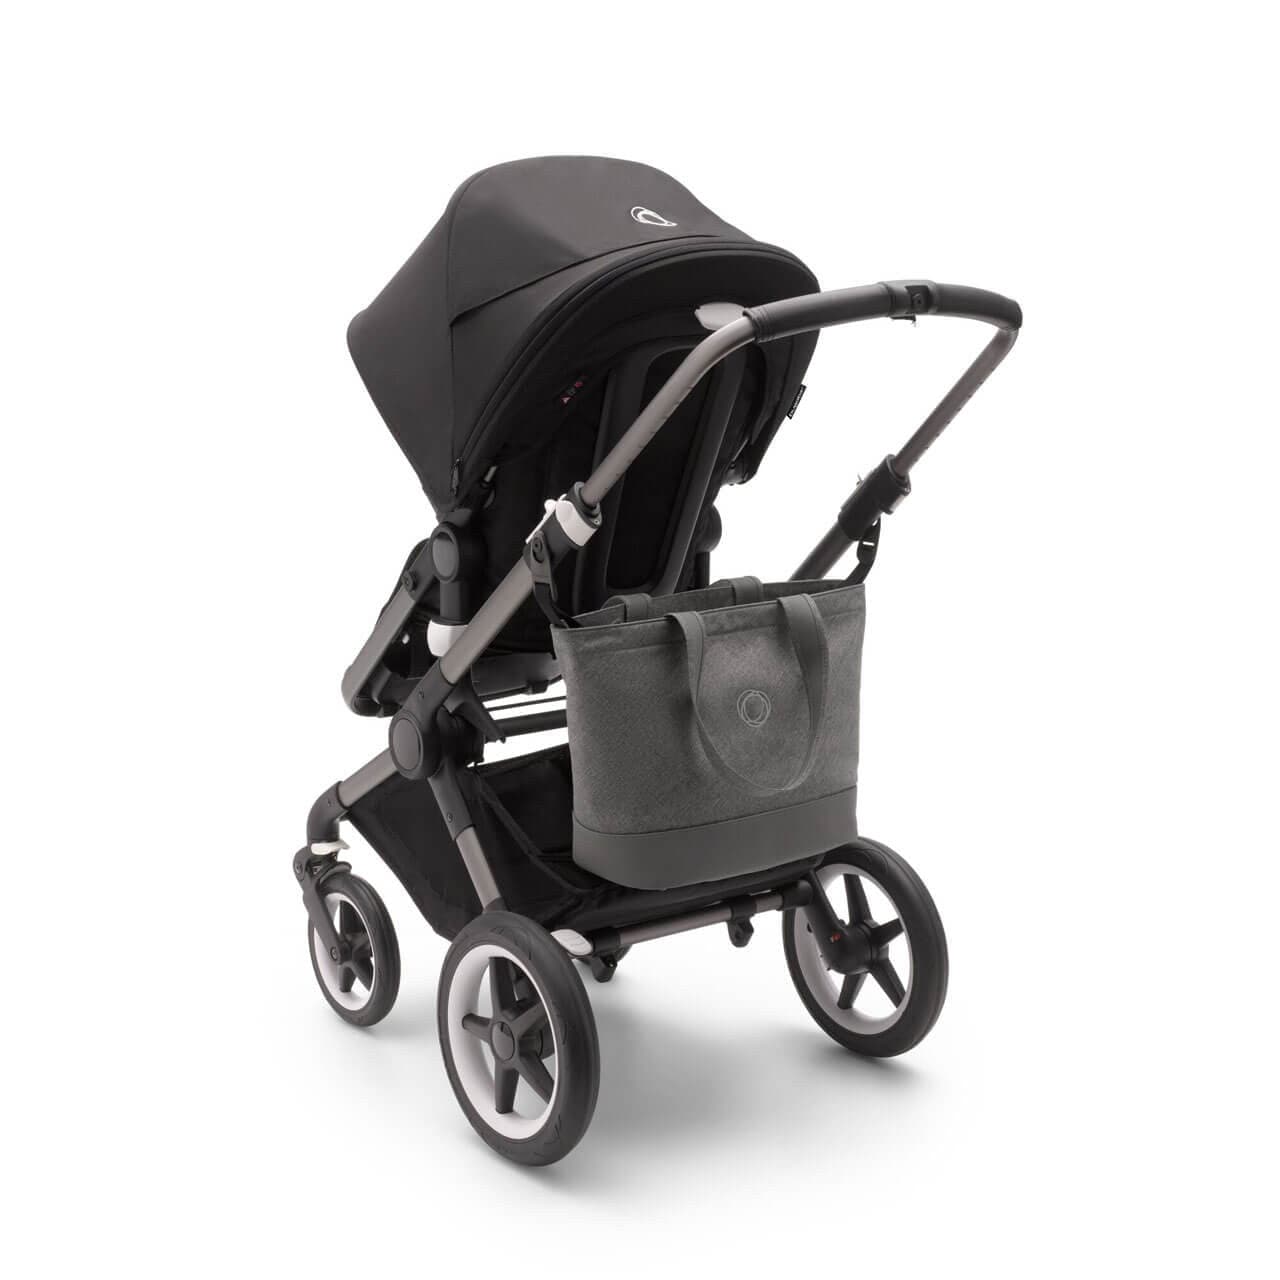 Bugaboo Changing Bag - Grey Melange - For Your Little One